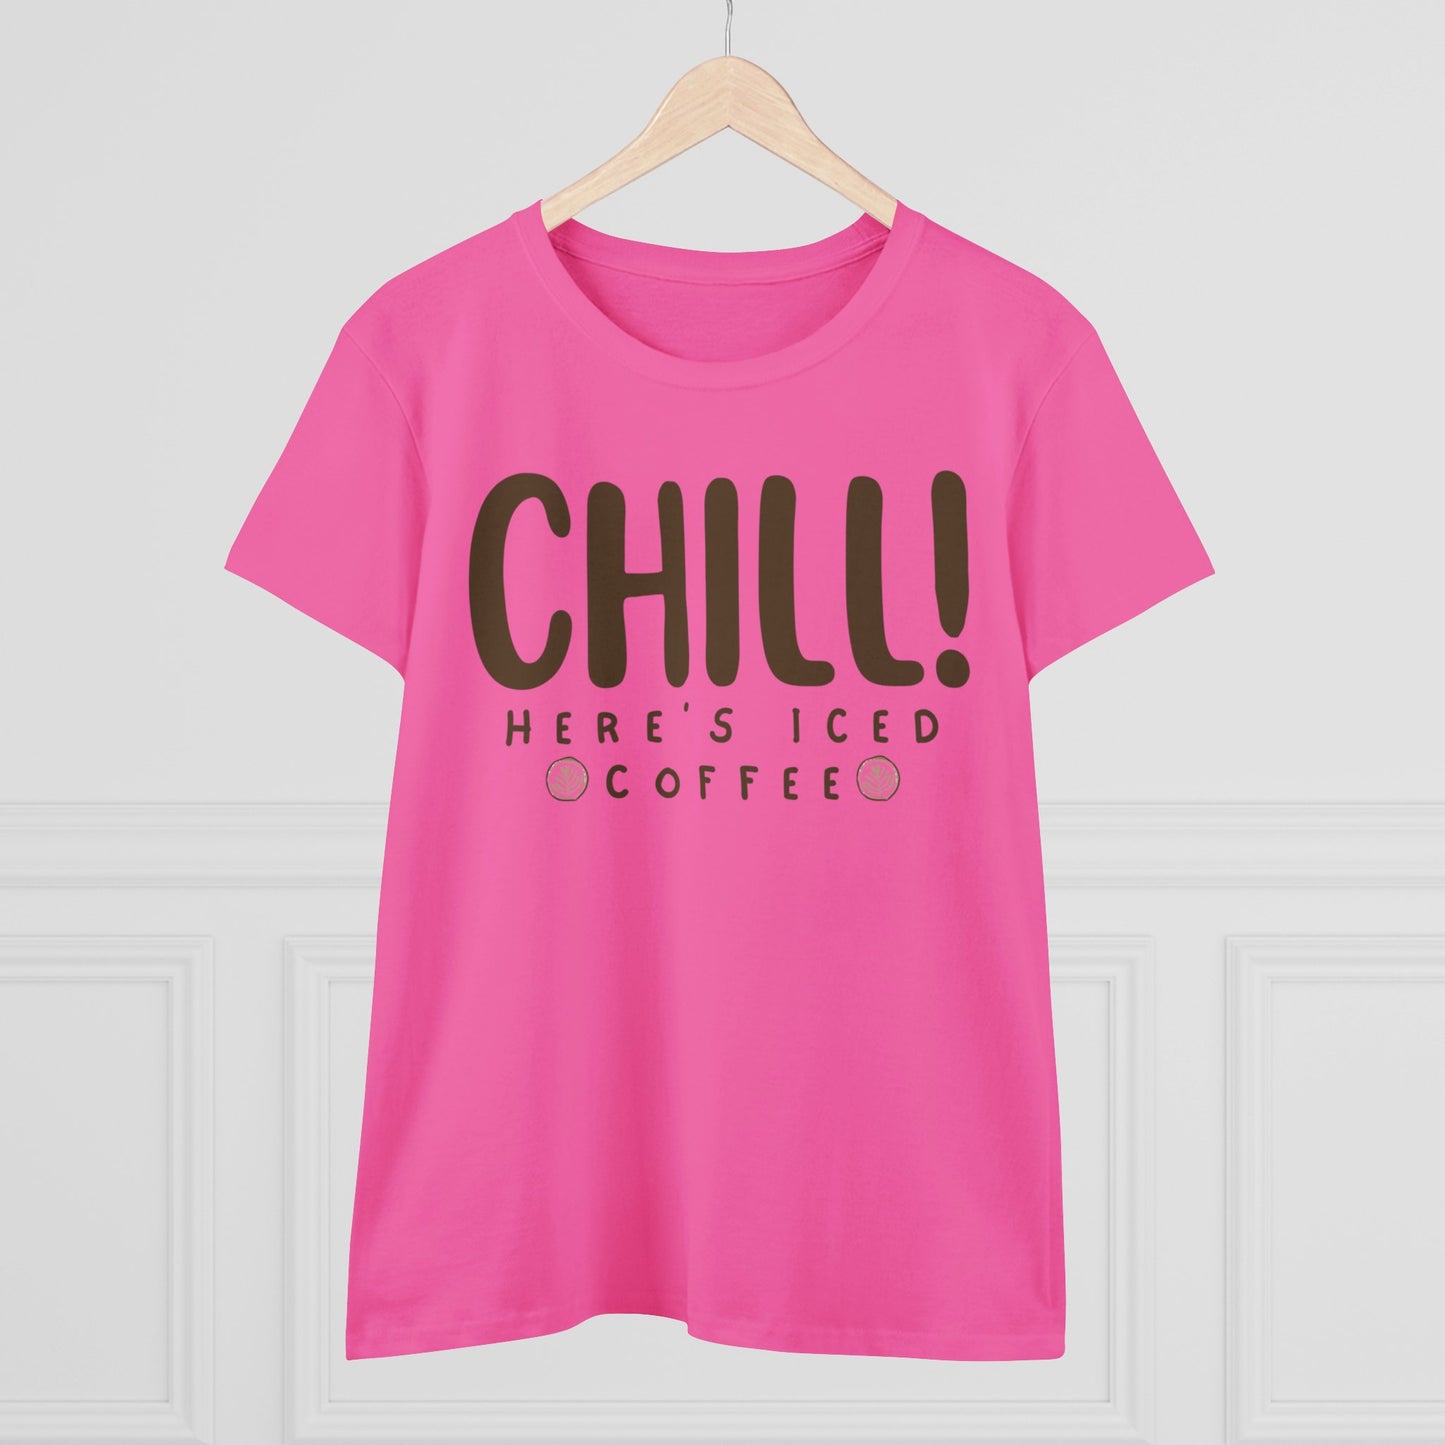 Chill! Here's Iced Coffee Shirt